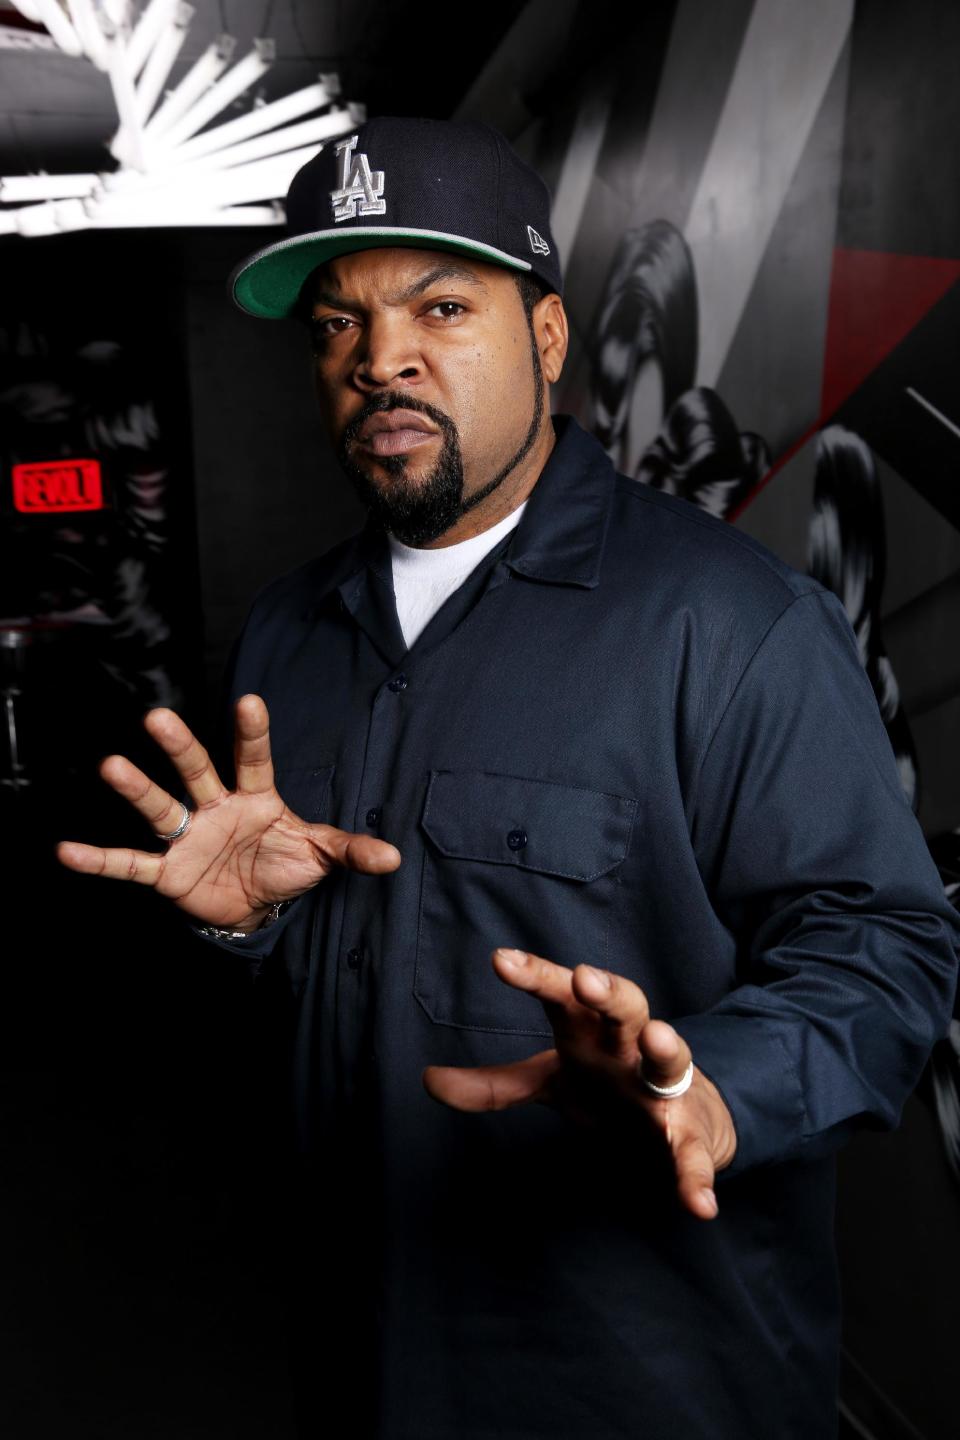 In this Tuesday, Feb. 11, 2014 photo, Ice Cube poses for a portrait in Los Angeles. Ice Cube co-starred with Kevin Hart in the film, "Ride Along," which has made over $134.6 million worldwide. (Photo by Matt Sayles/Invision/AP)